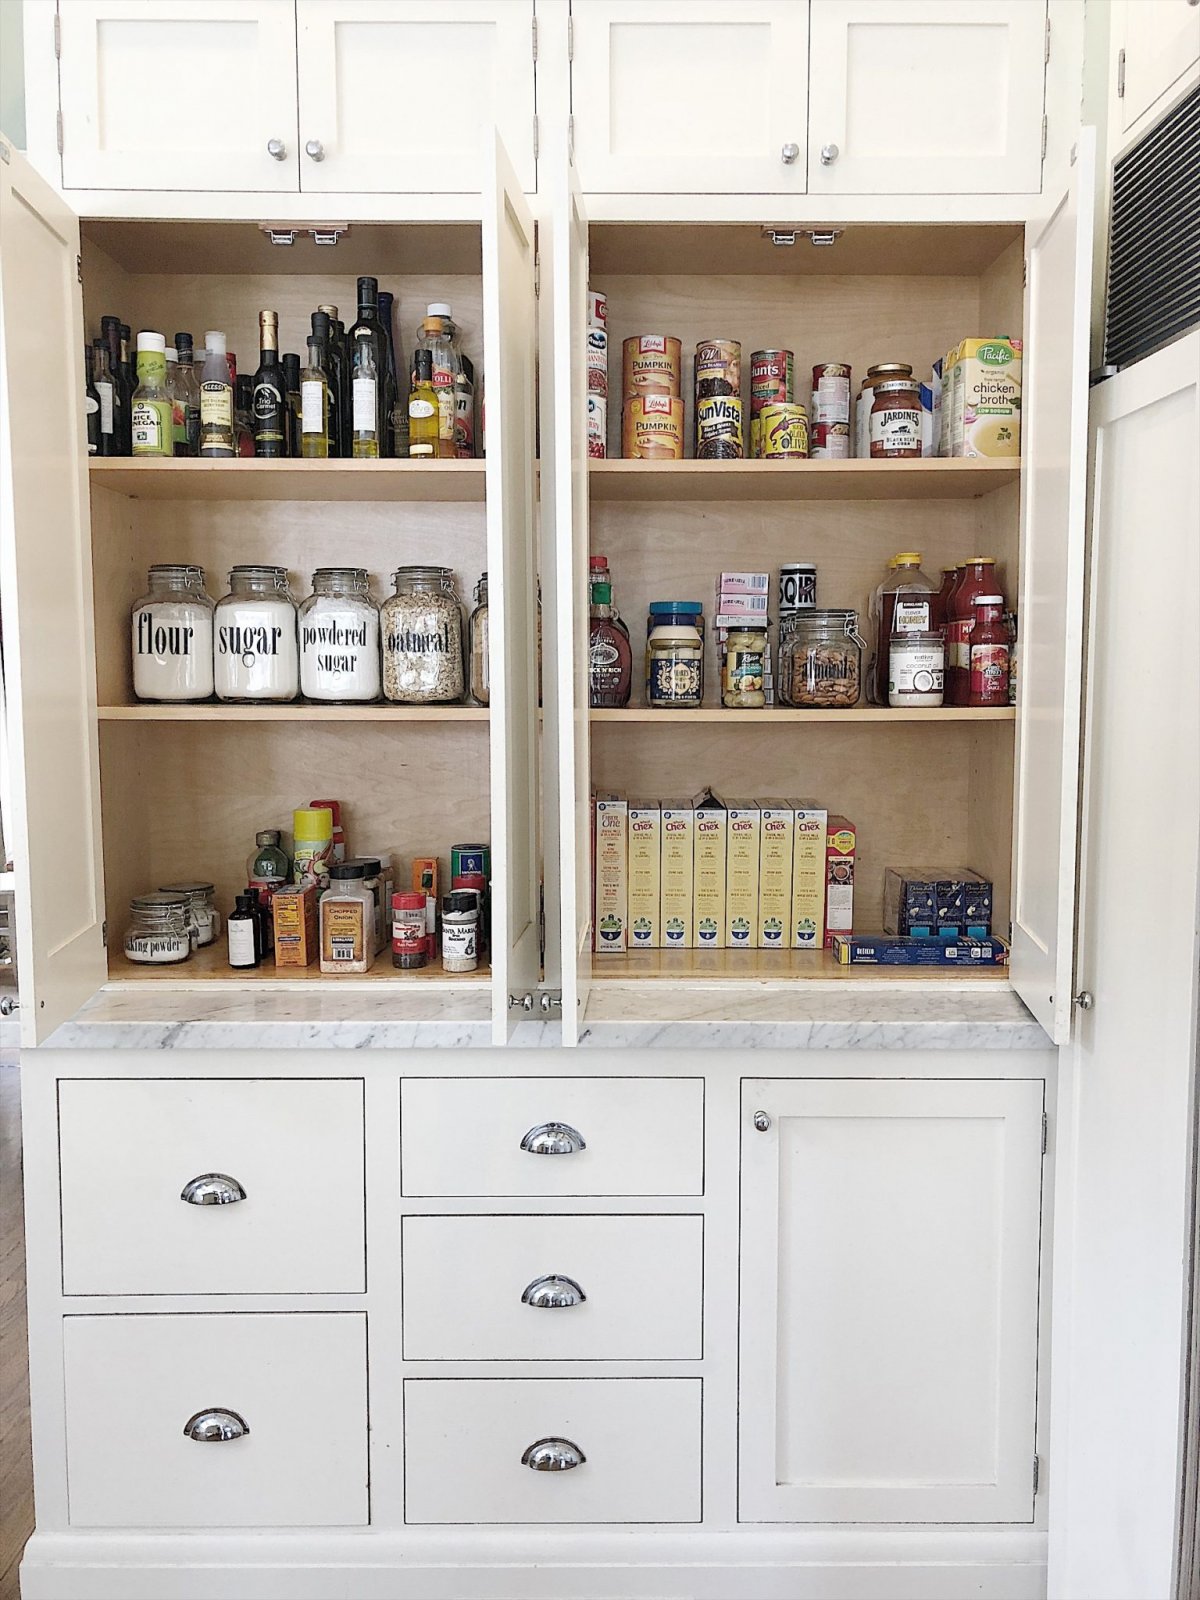 7 Best Pull-Out Cabinet Organizers You Can DIY